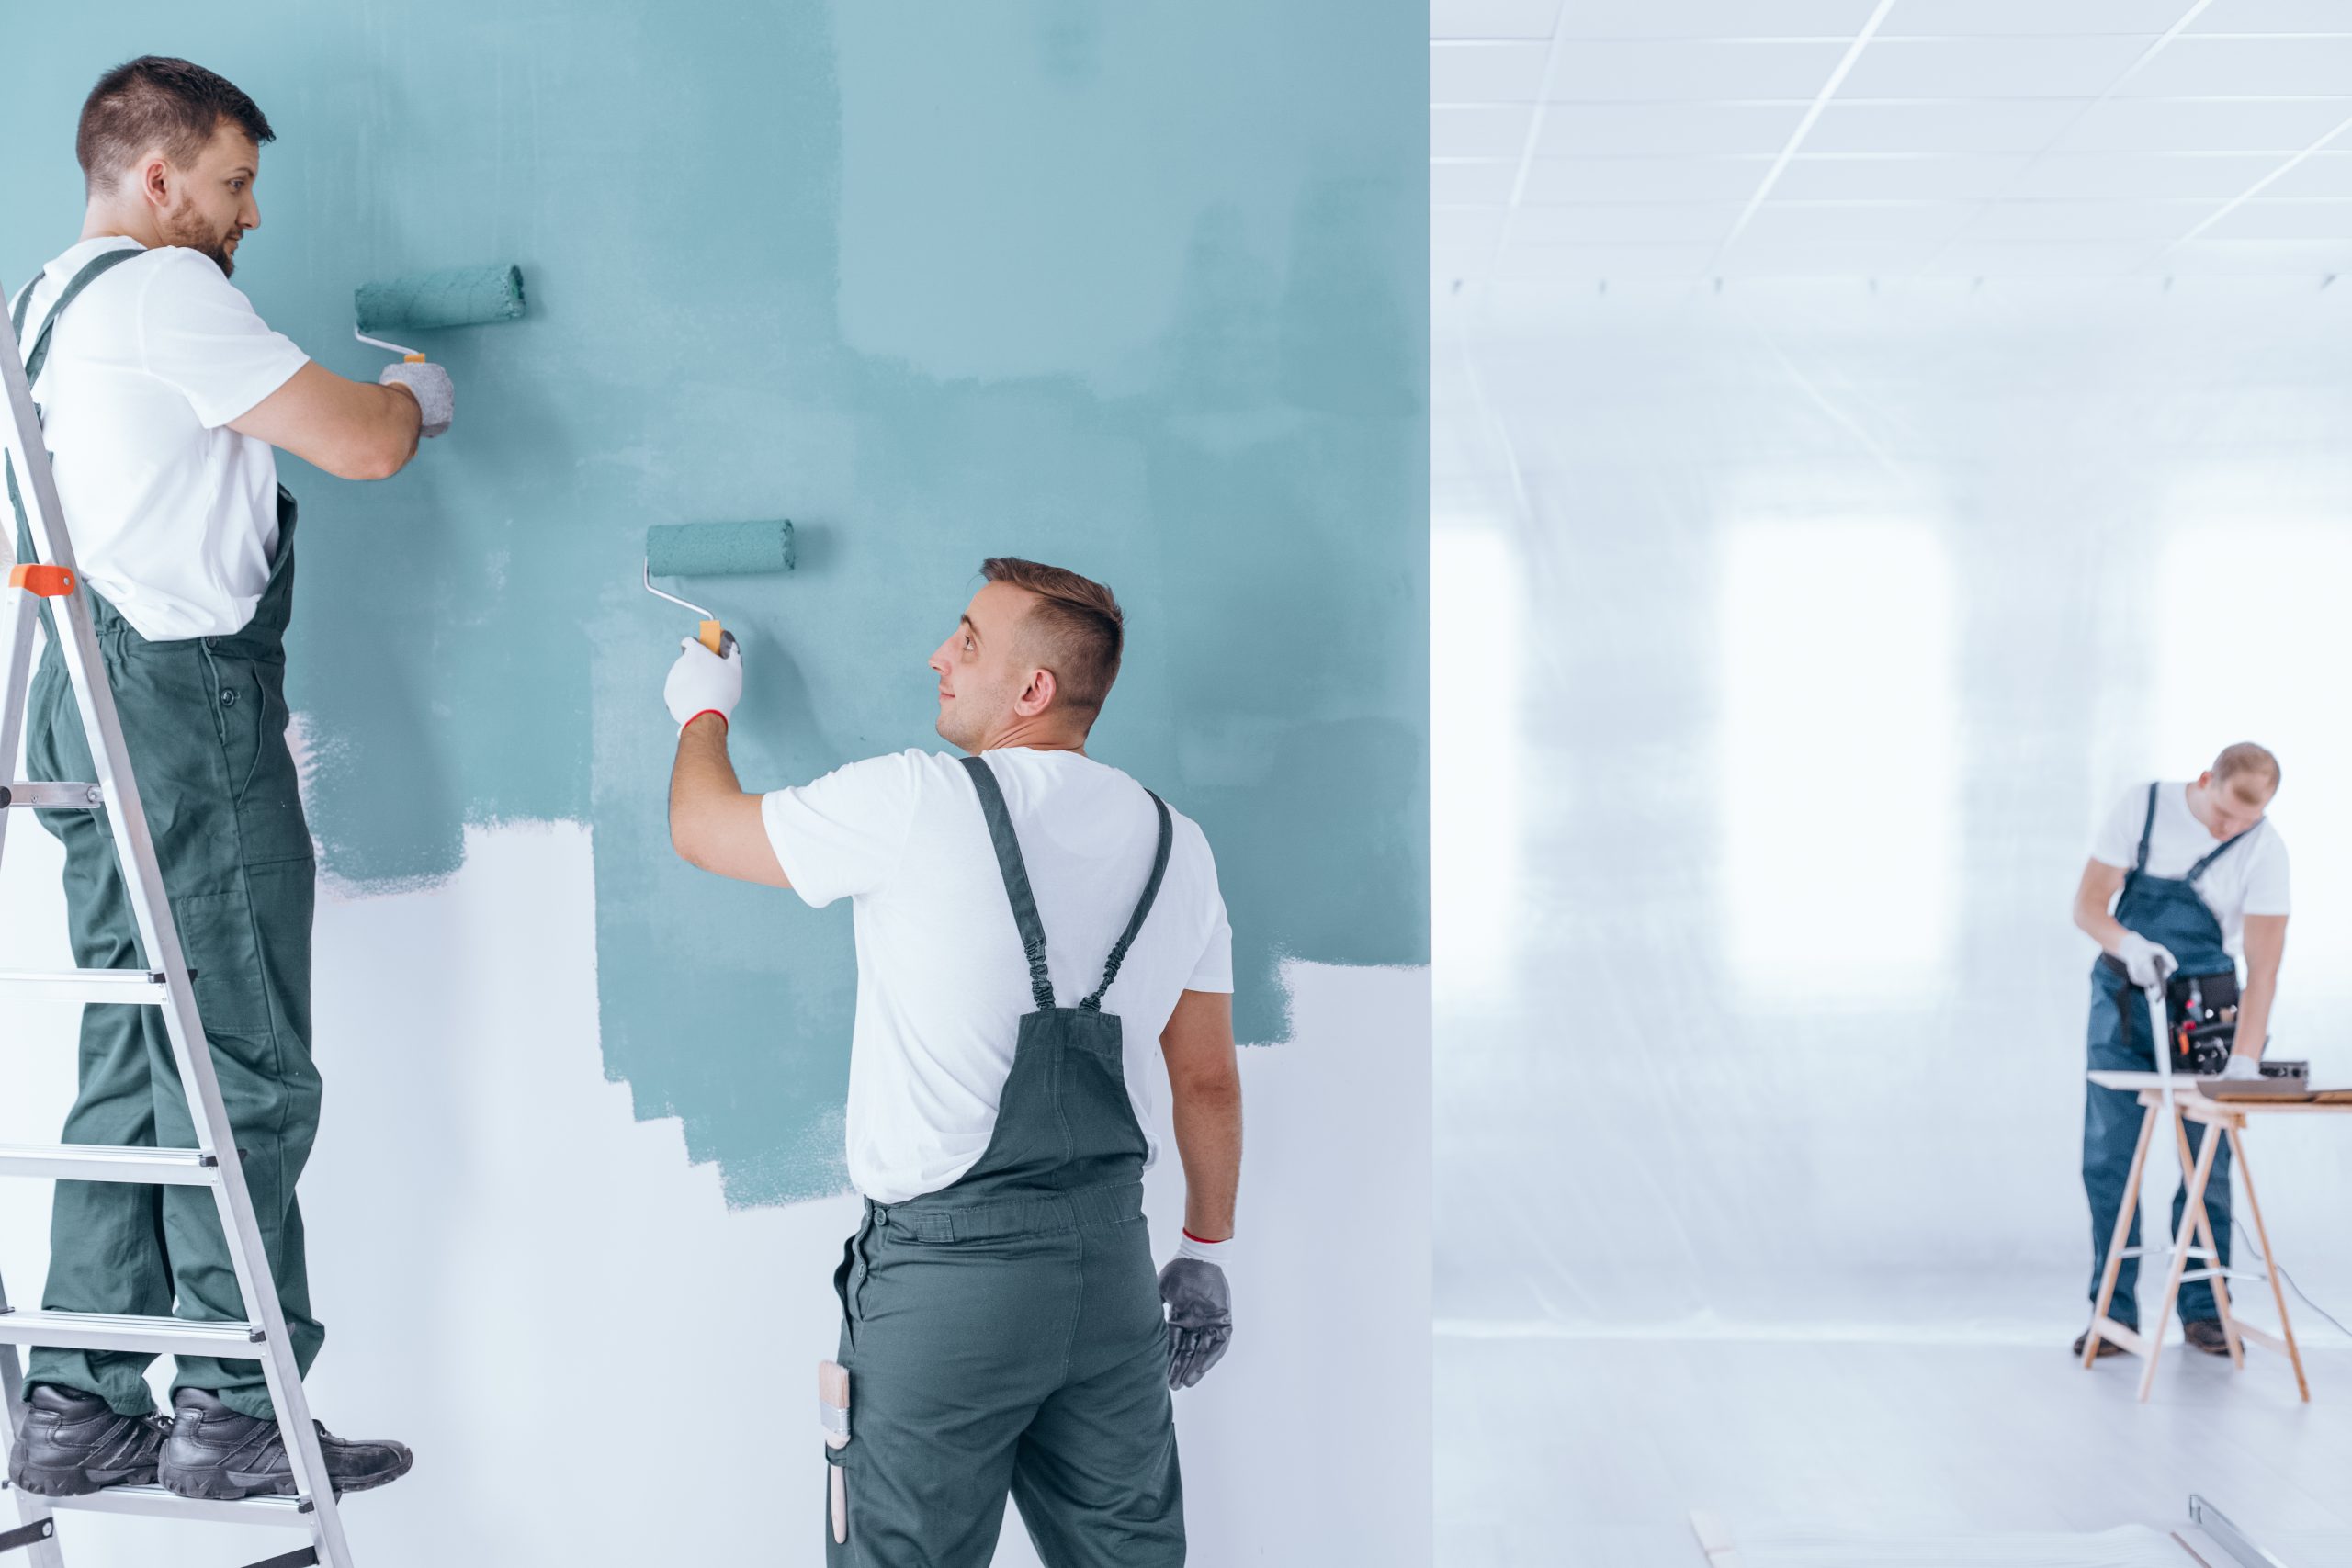 men painting empty home interior 2021 08 26 15 43 17 utc scaled - Our Services